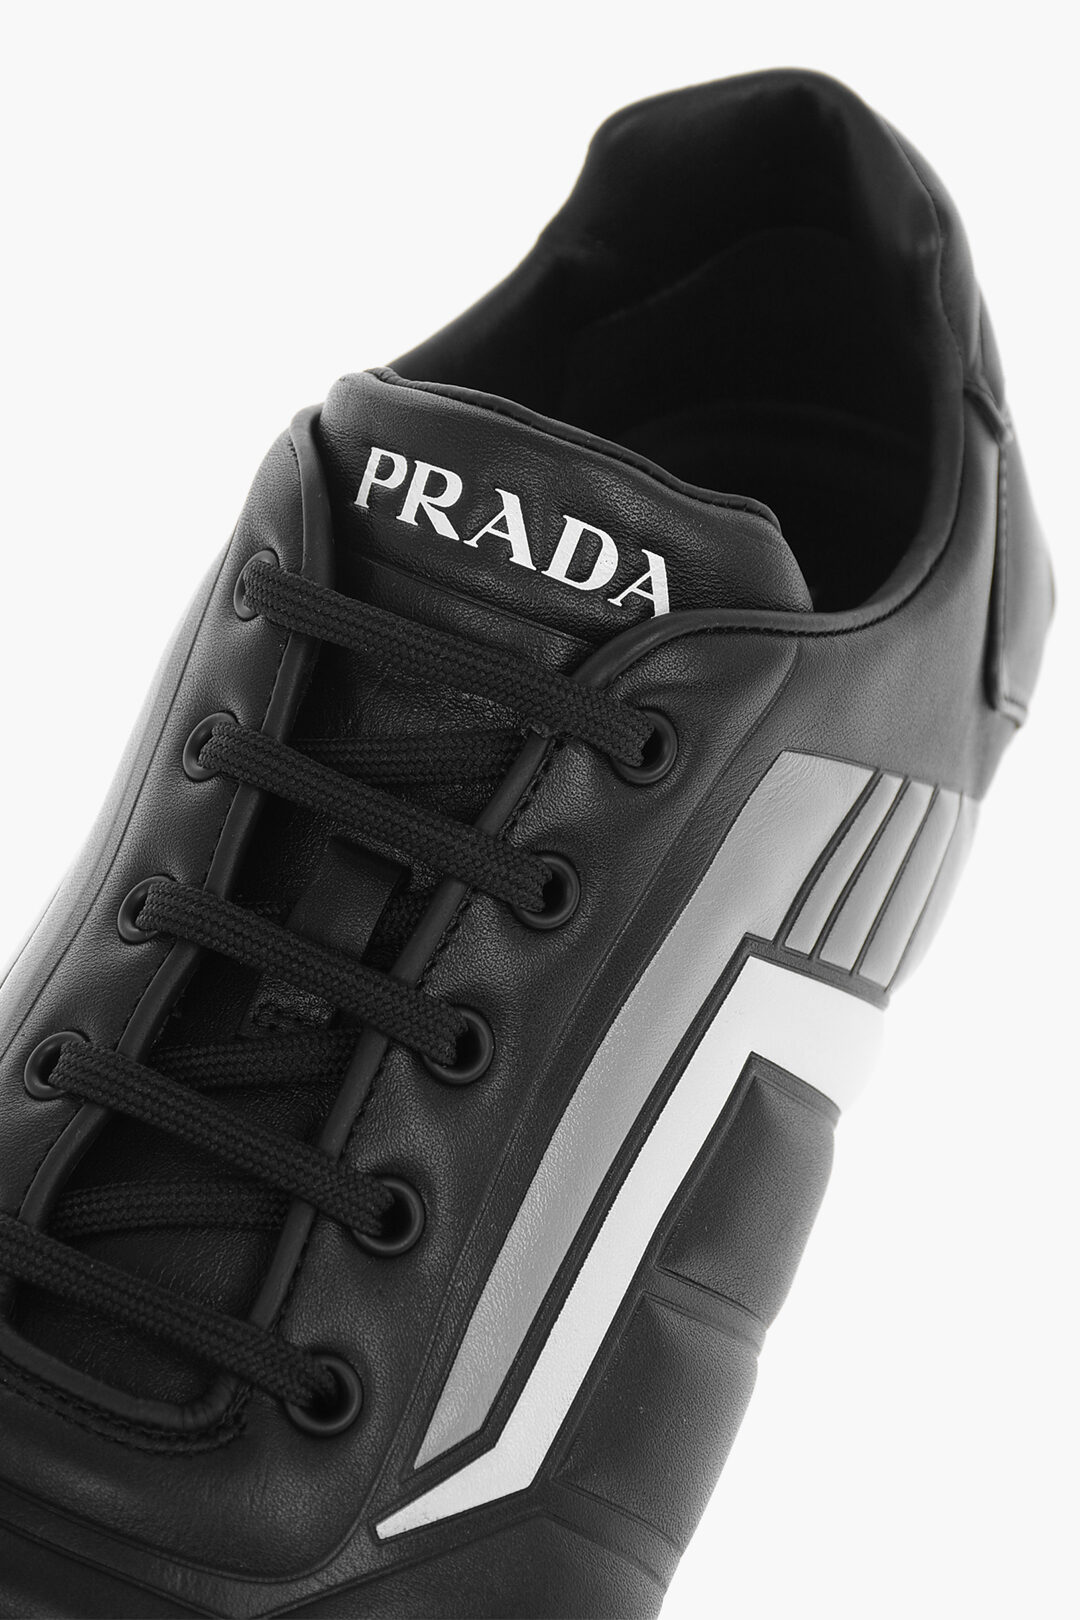 Prada Leather Top Sneakers men Glamood Outlet